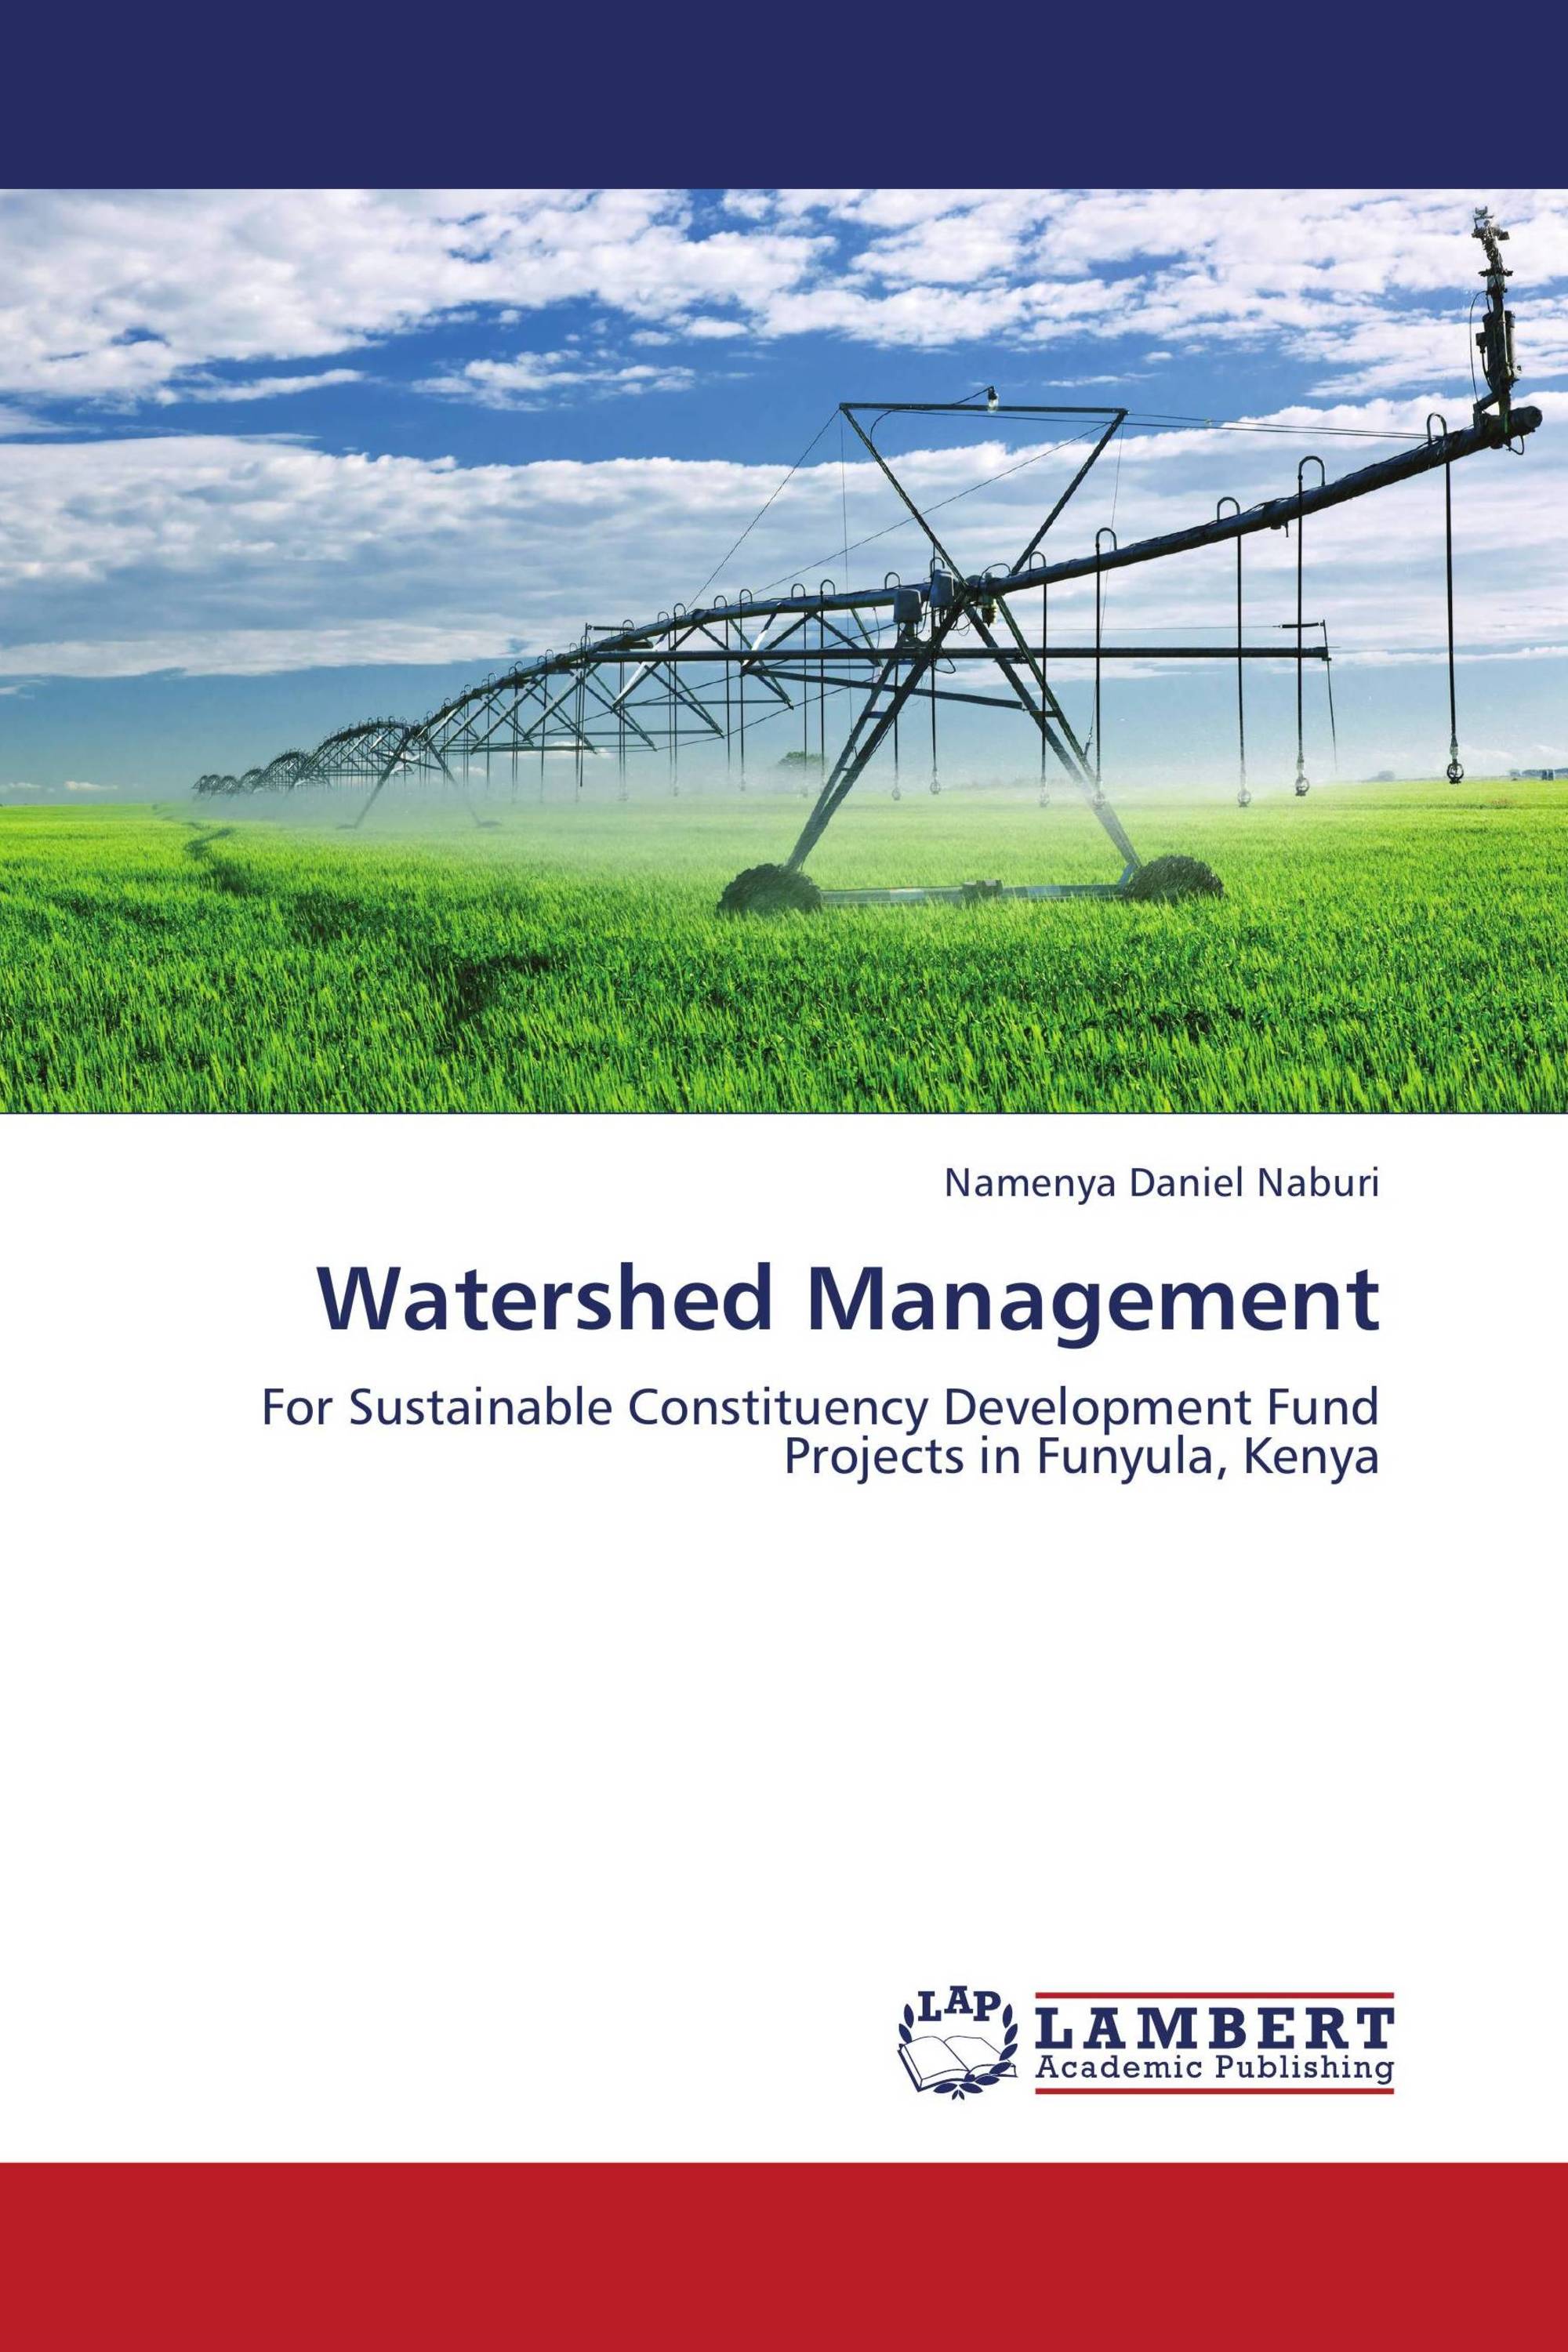 research paper on watershed management